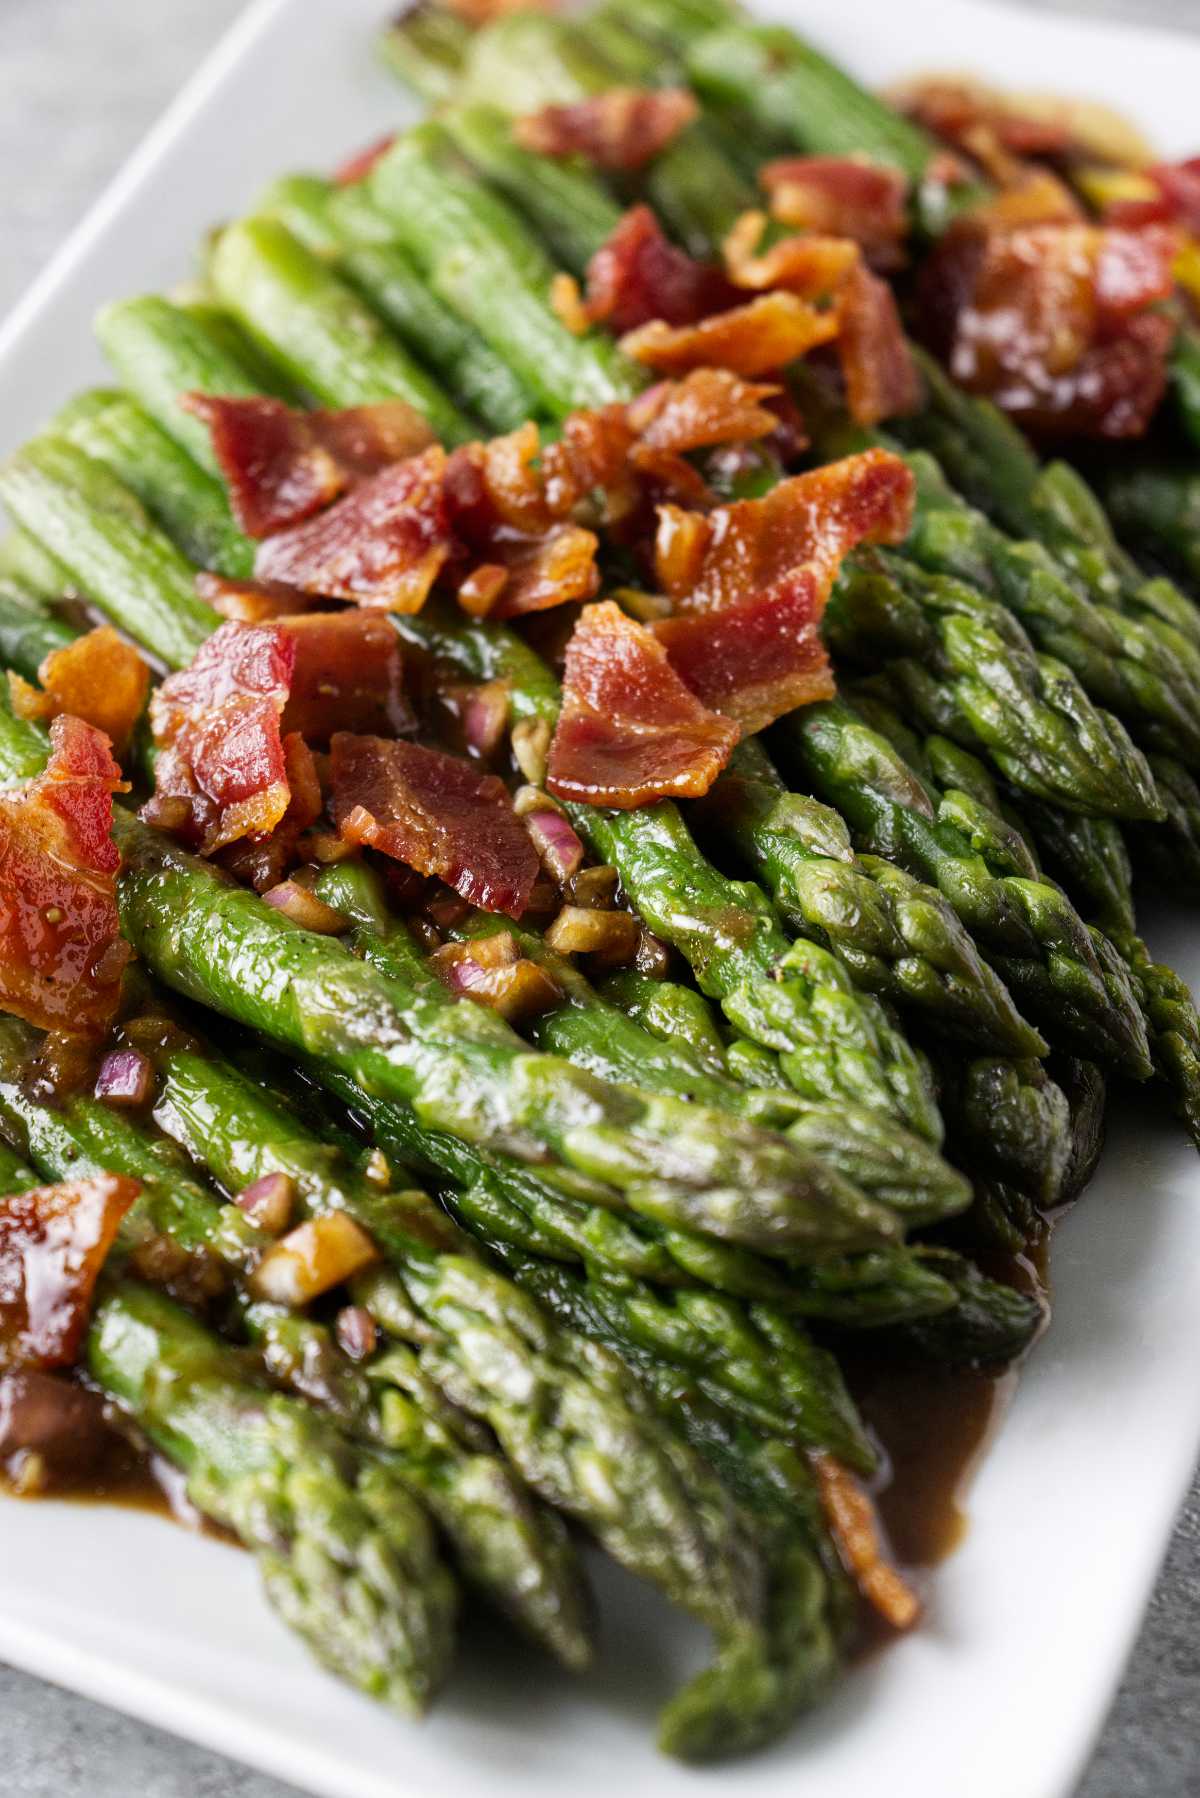 Frozen asparagus cooked in an air fryer and plated with crumbled bacon and a vinaigrette.